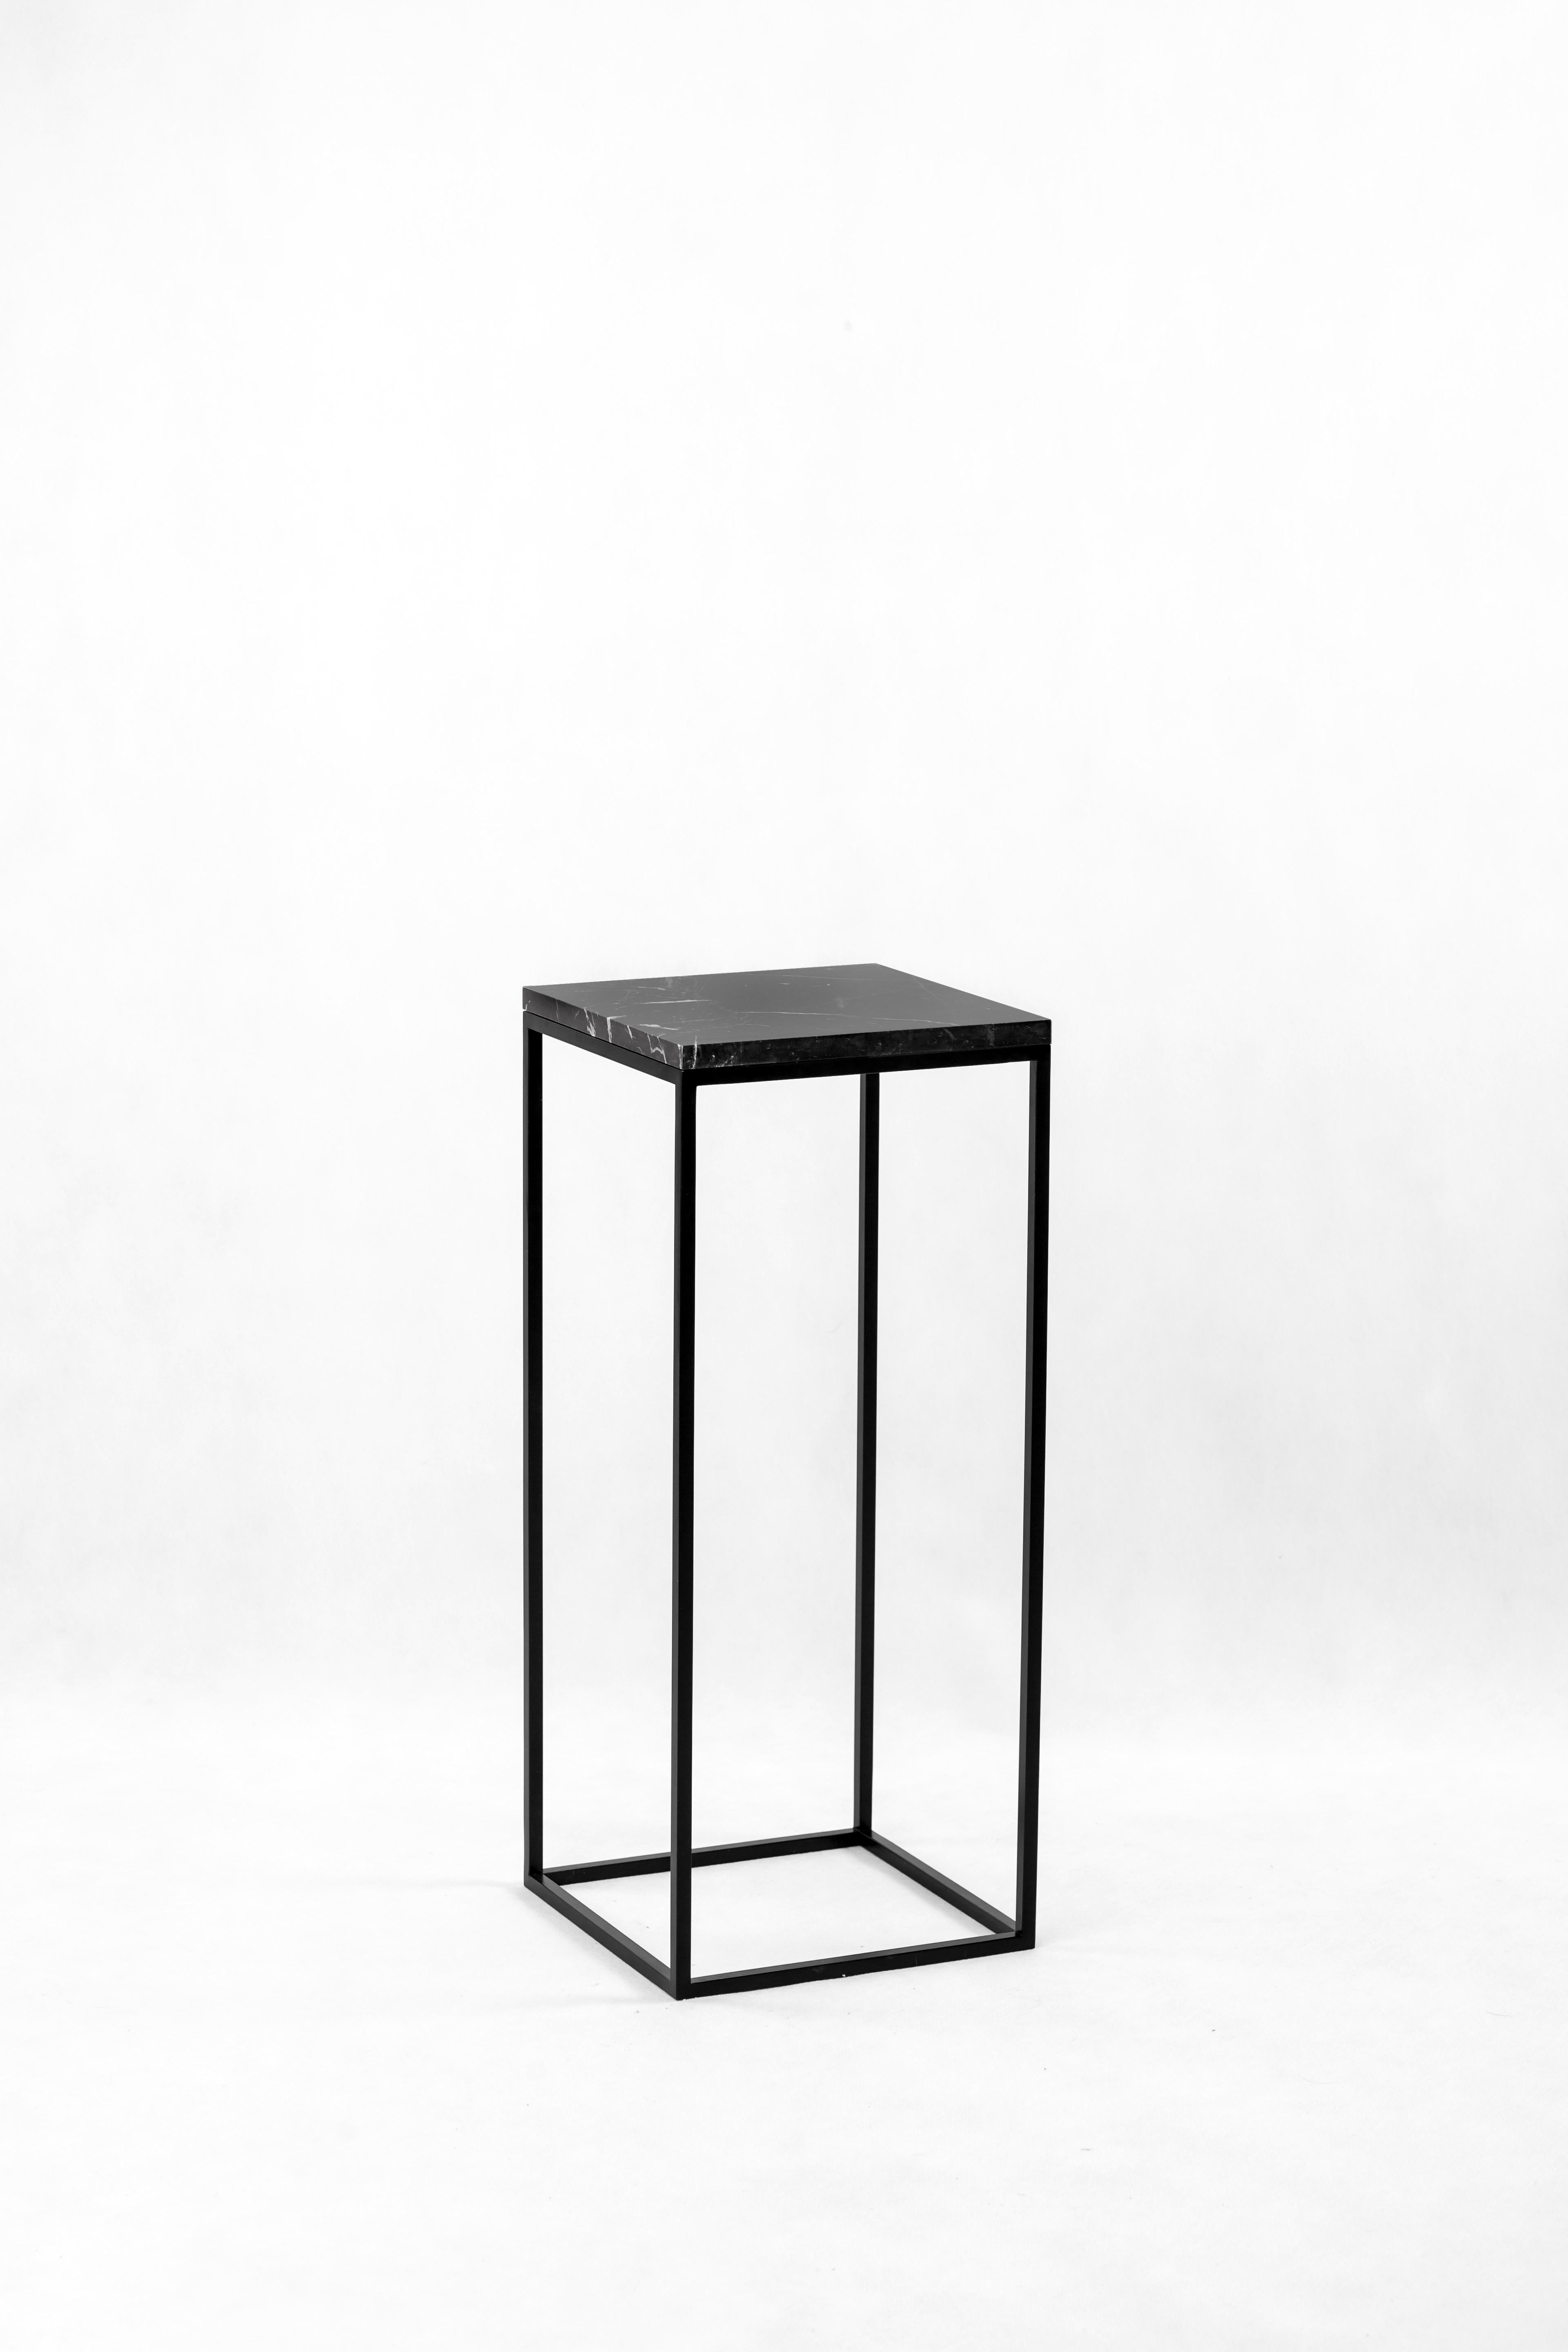 Set of 2 small and medium Pillar side tables by Un’common
Dimensions: W 30 x D 30 x H 72 cm / W 30 x D 30 x H 42 cm.
Materials: Nero Marquina marble, steel.
Available in 3 sizes: H42, H72, H90 cm.

PILLAR is a piece of accessory furniture. Do